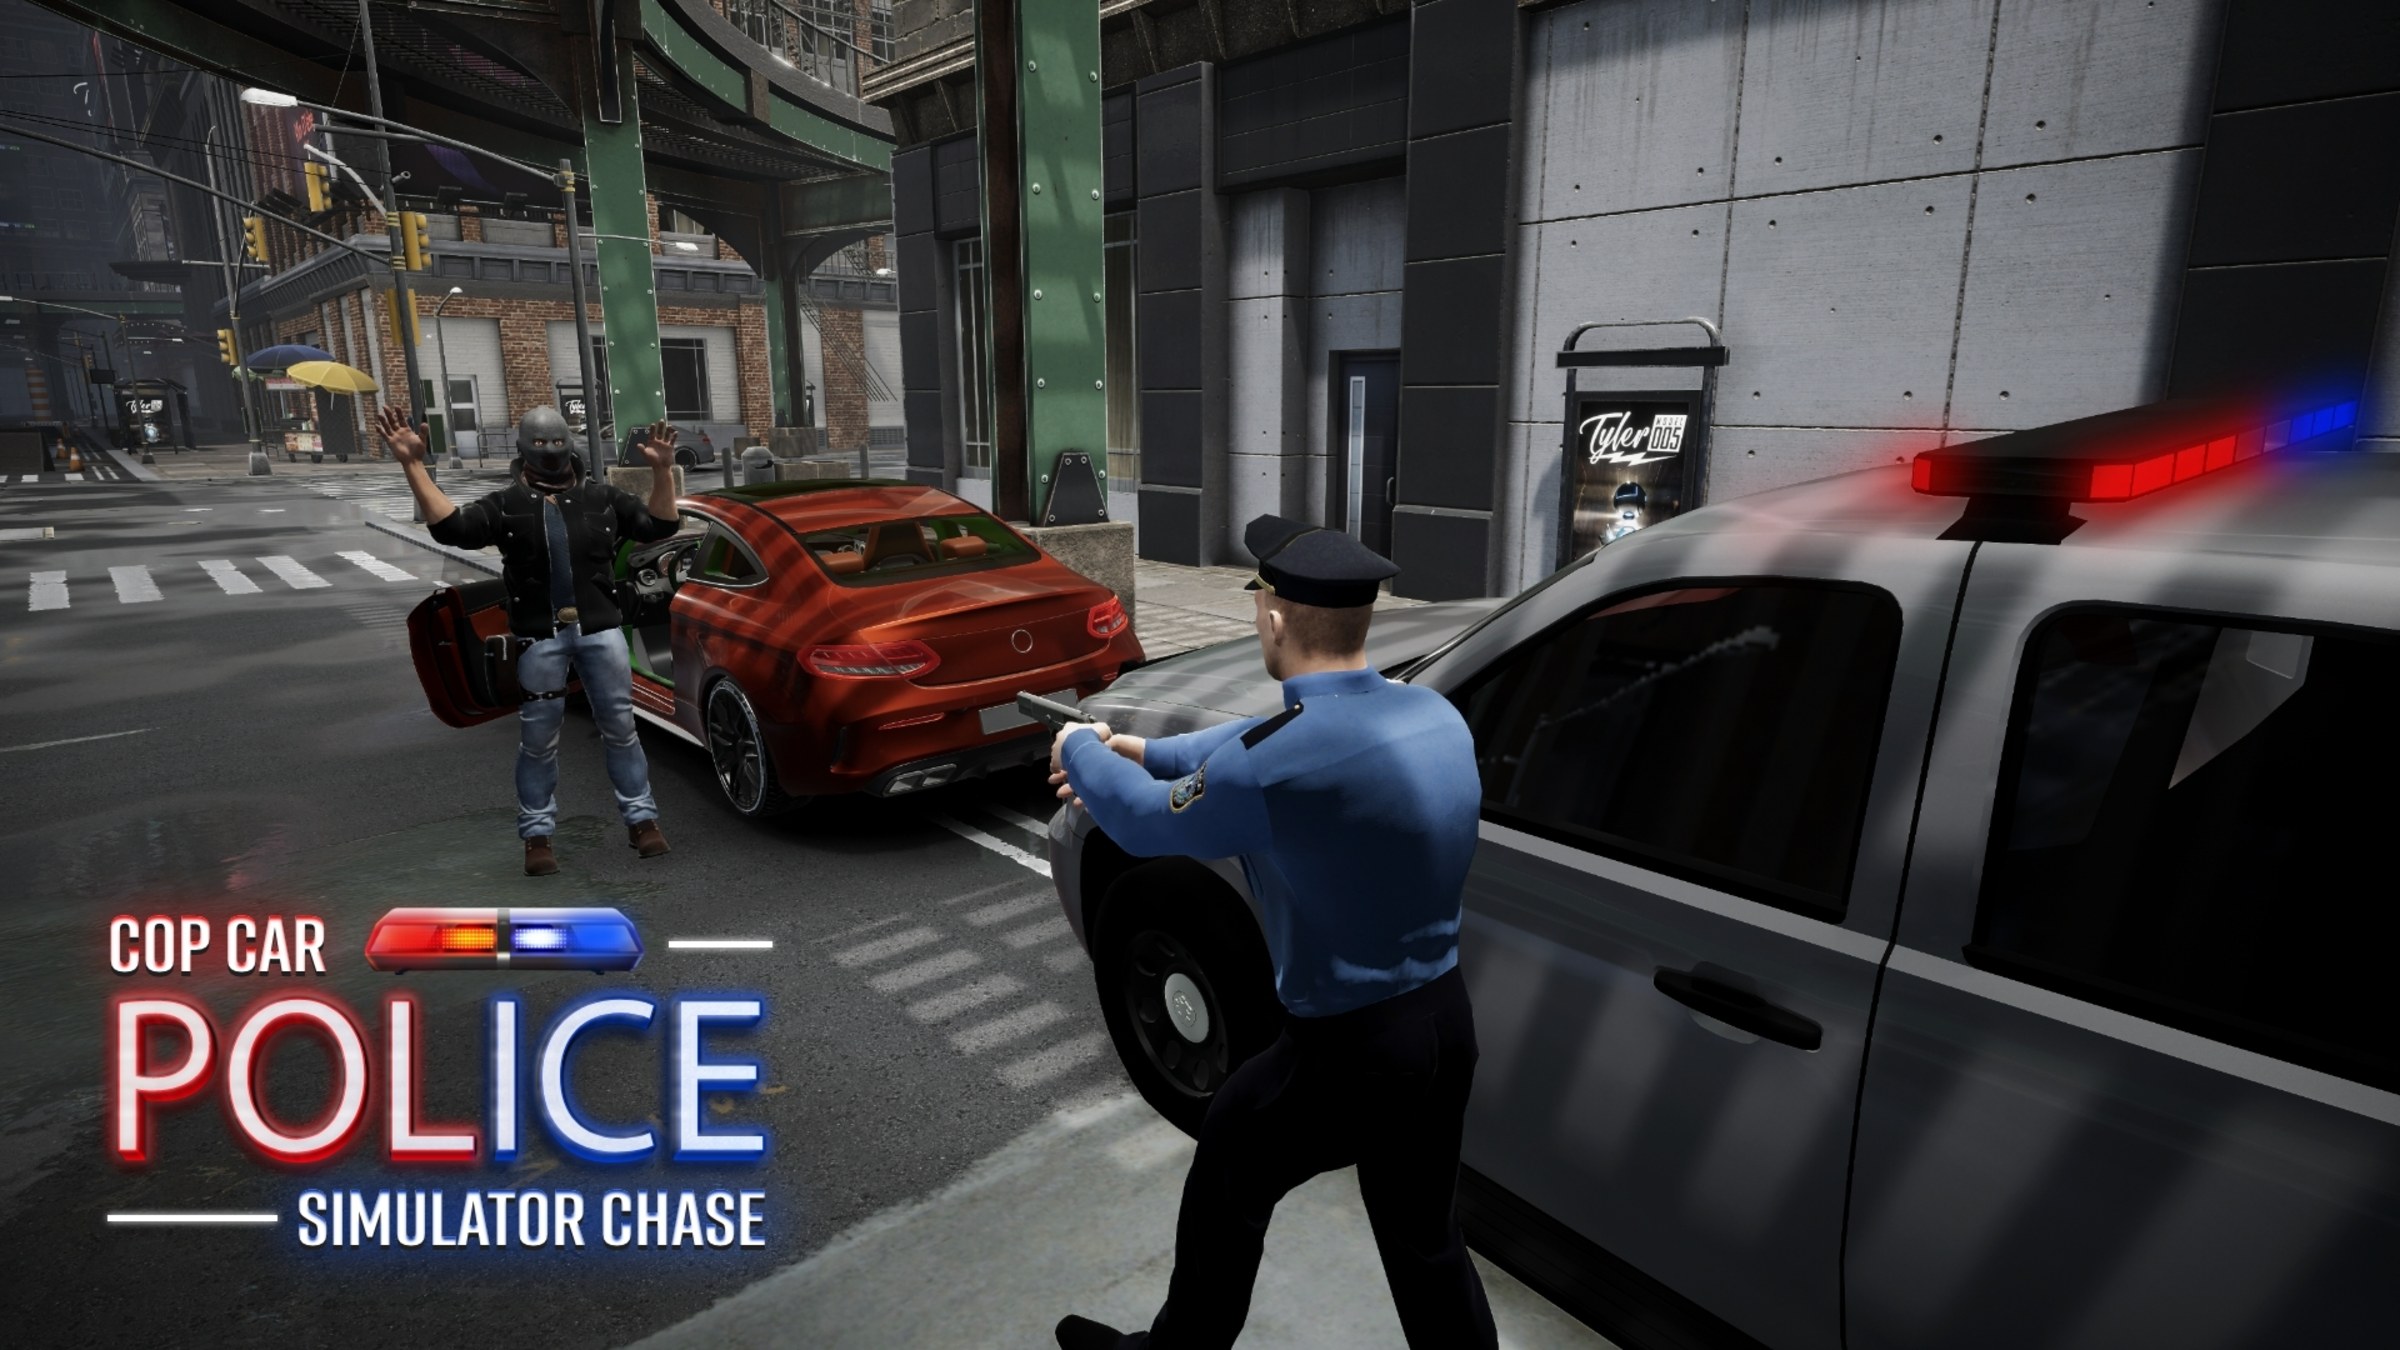 Cop Car Police Simulator Chase Car Games Simulator And Driving Para Nintendo Switch Site 9465